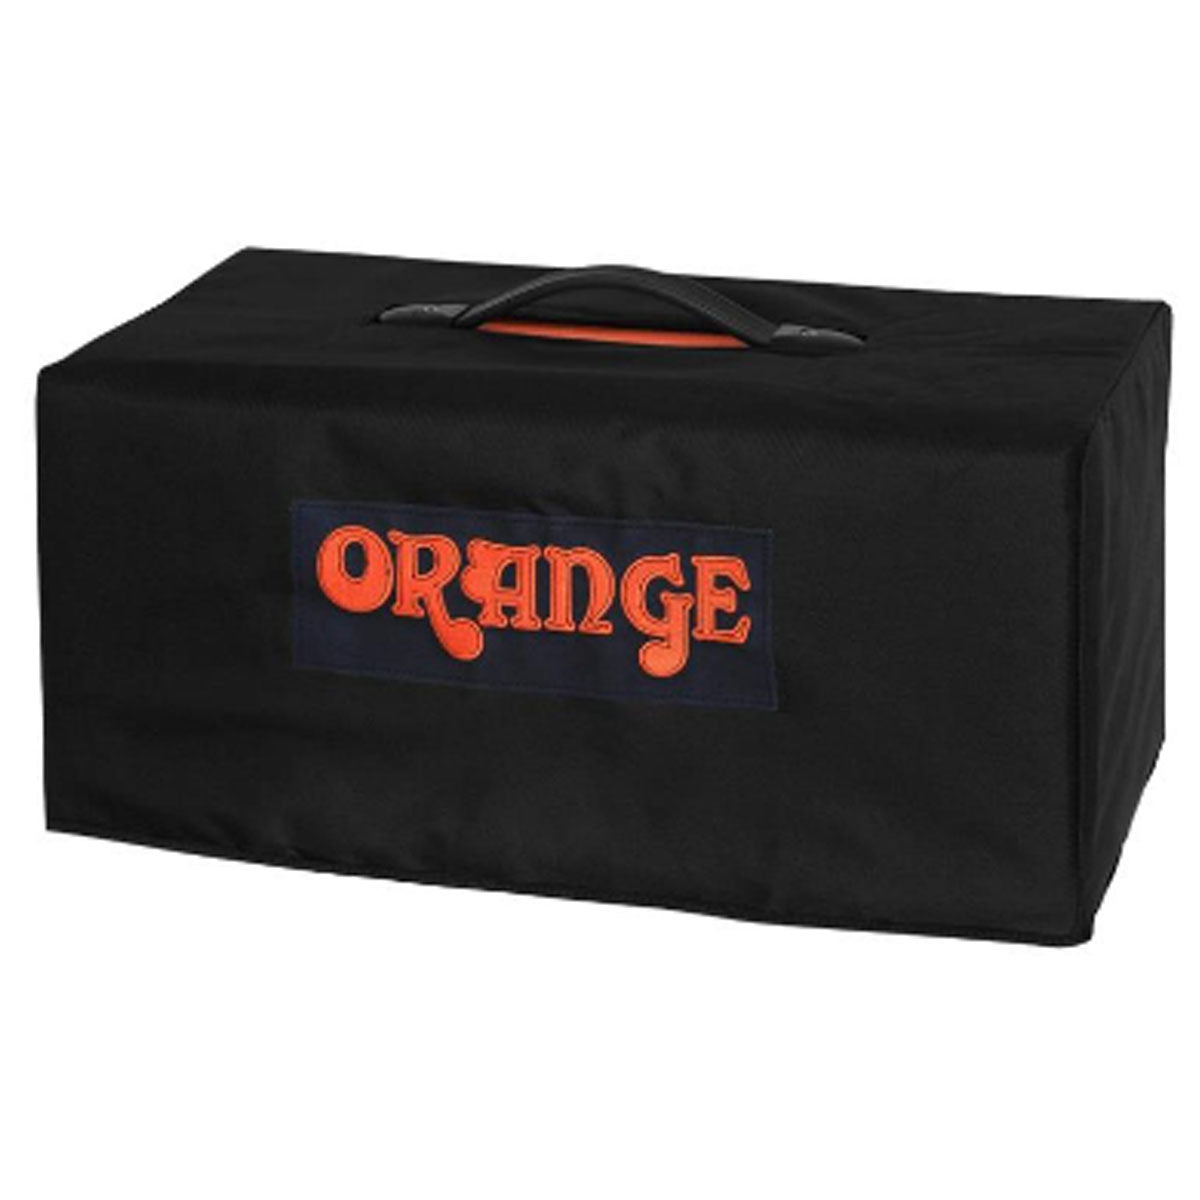 Orange Amplifier Cover 212 Combo Cover for 2x12inch Amp Combos